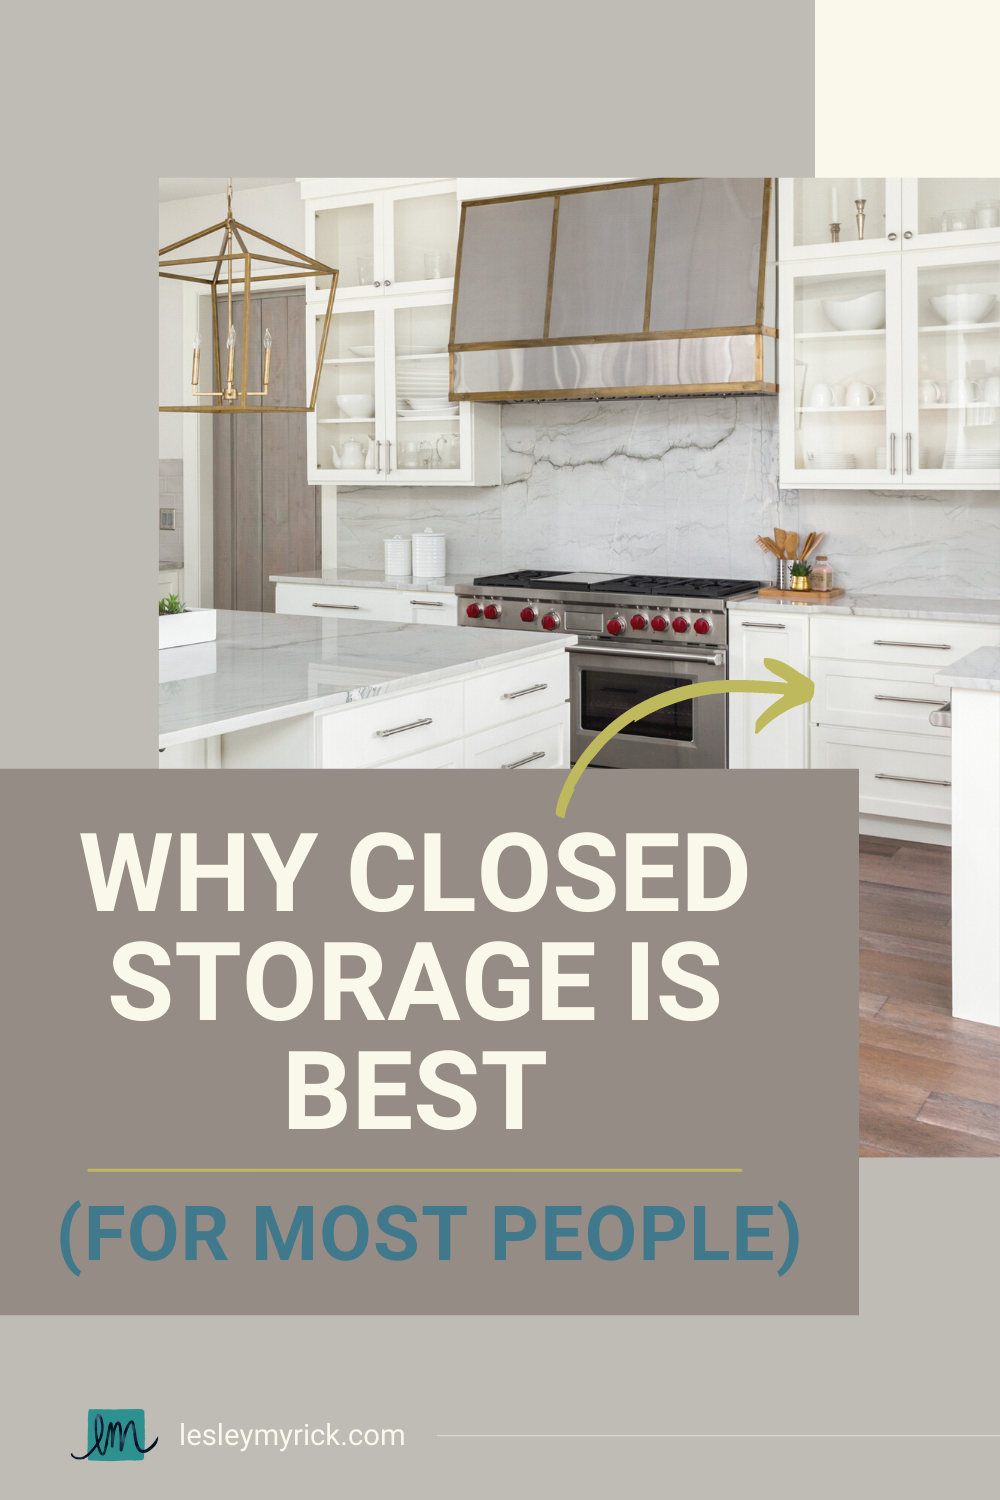 Why closed storage is best - for most people. Storage and organization tips from interior designer Lesley Myrick. 